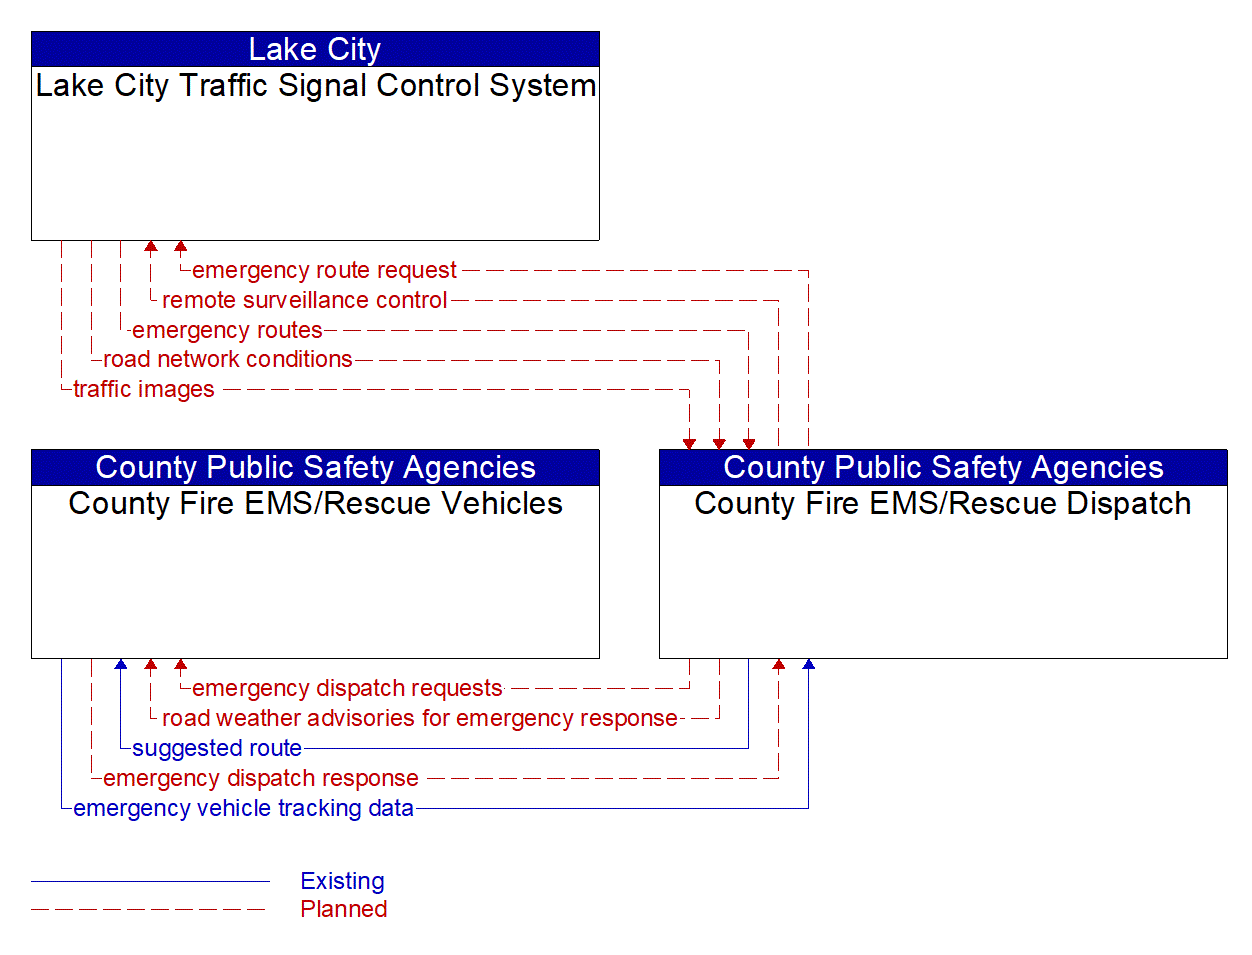 Service Graphic: Emergency Call-Taking and Dispatch (Lake City Traffic Signal Control System)